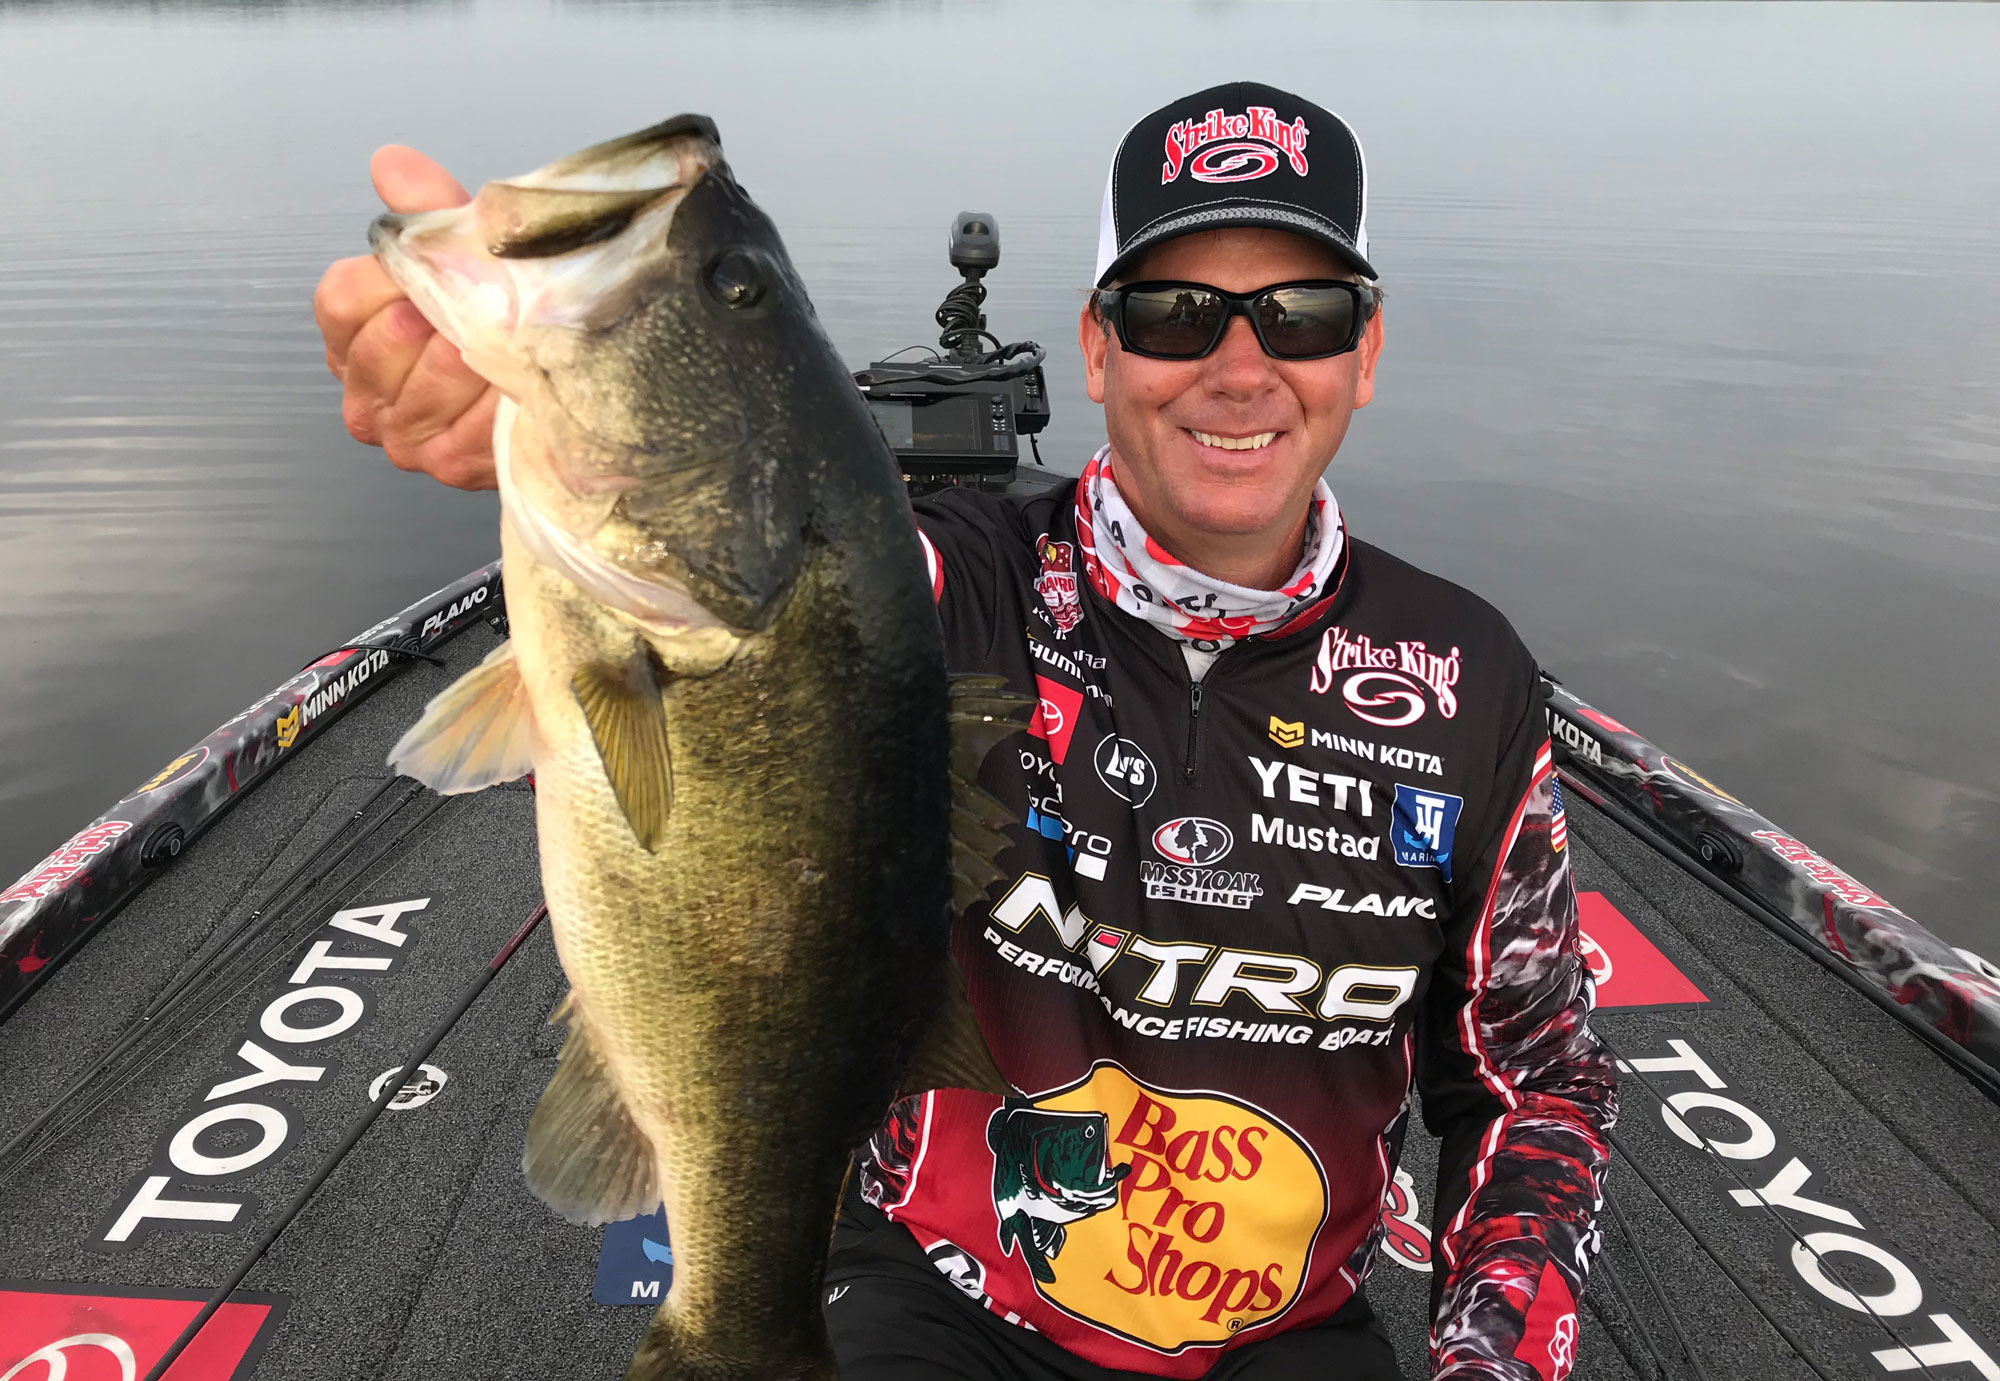 KEVIN VANDAM: There Was a Lot of 'New' at the Kissimmee Chain